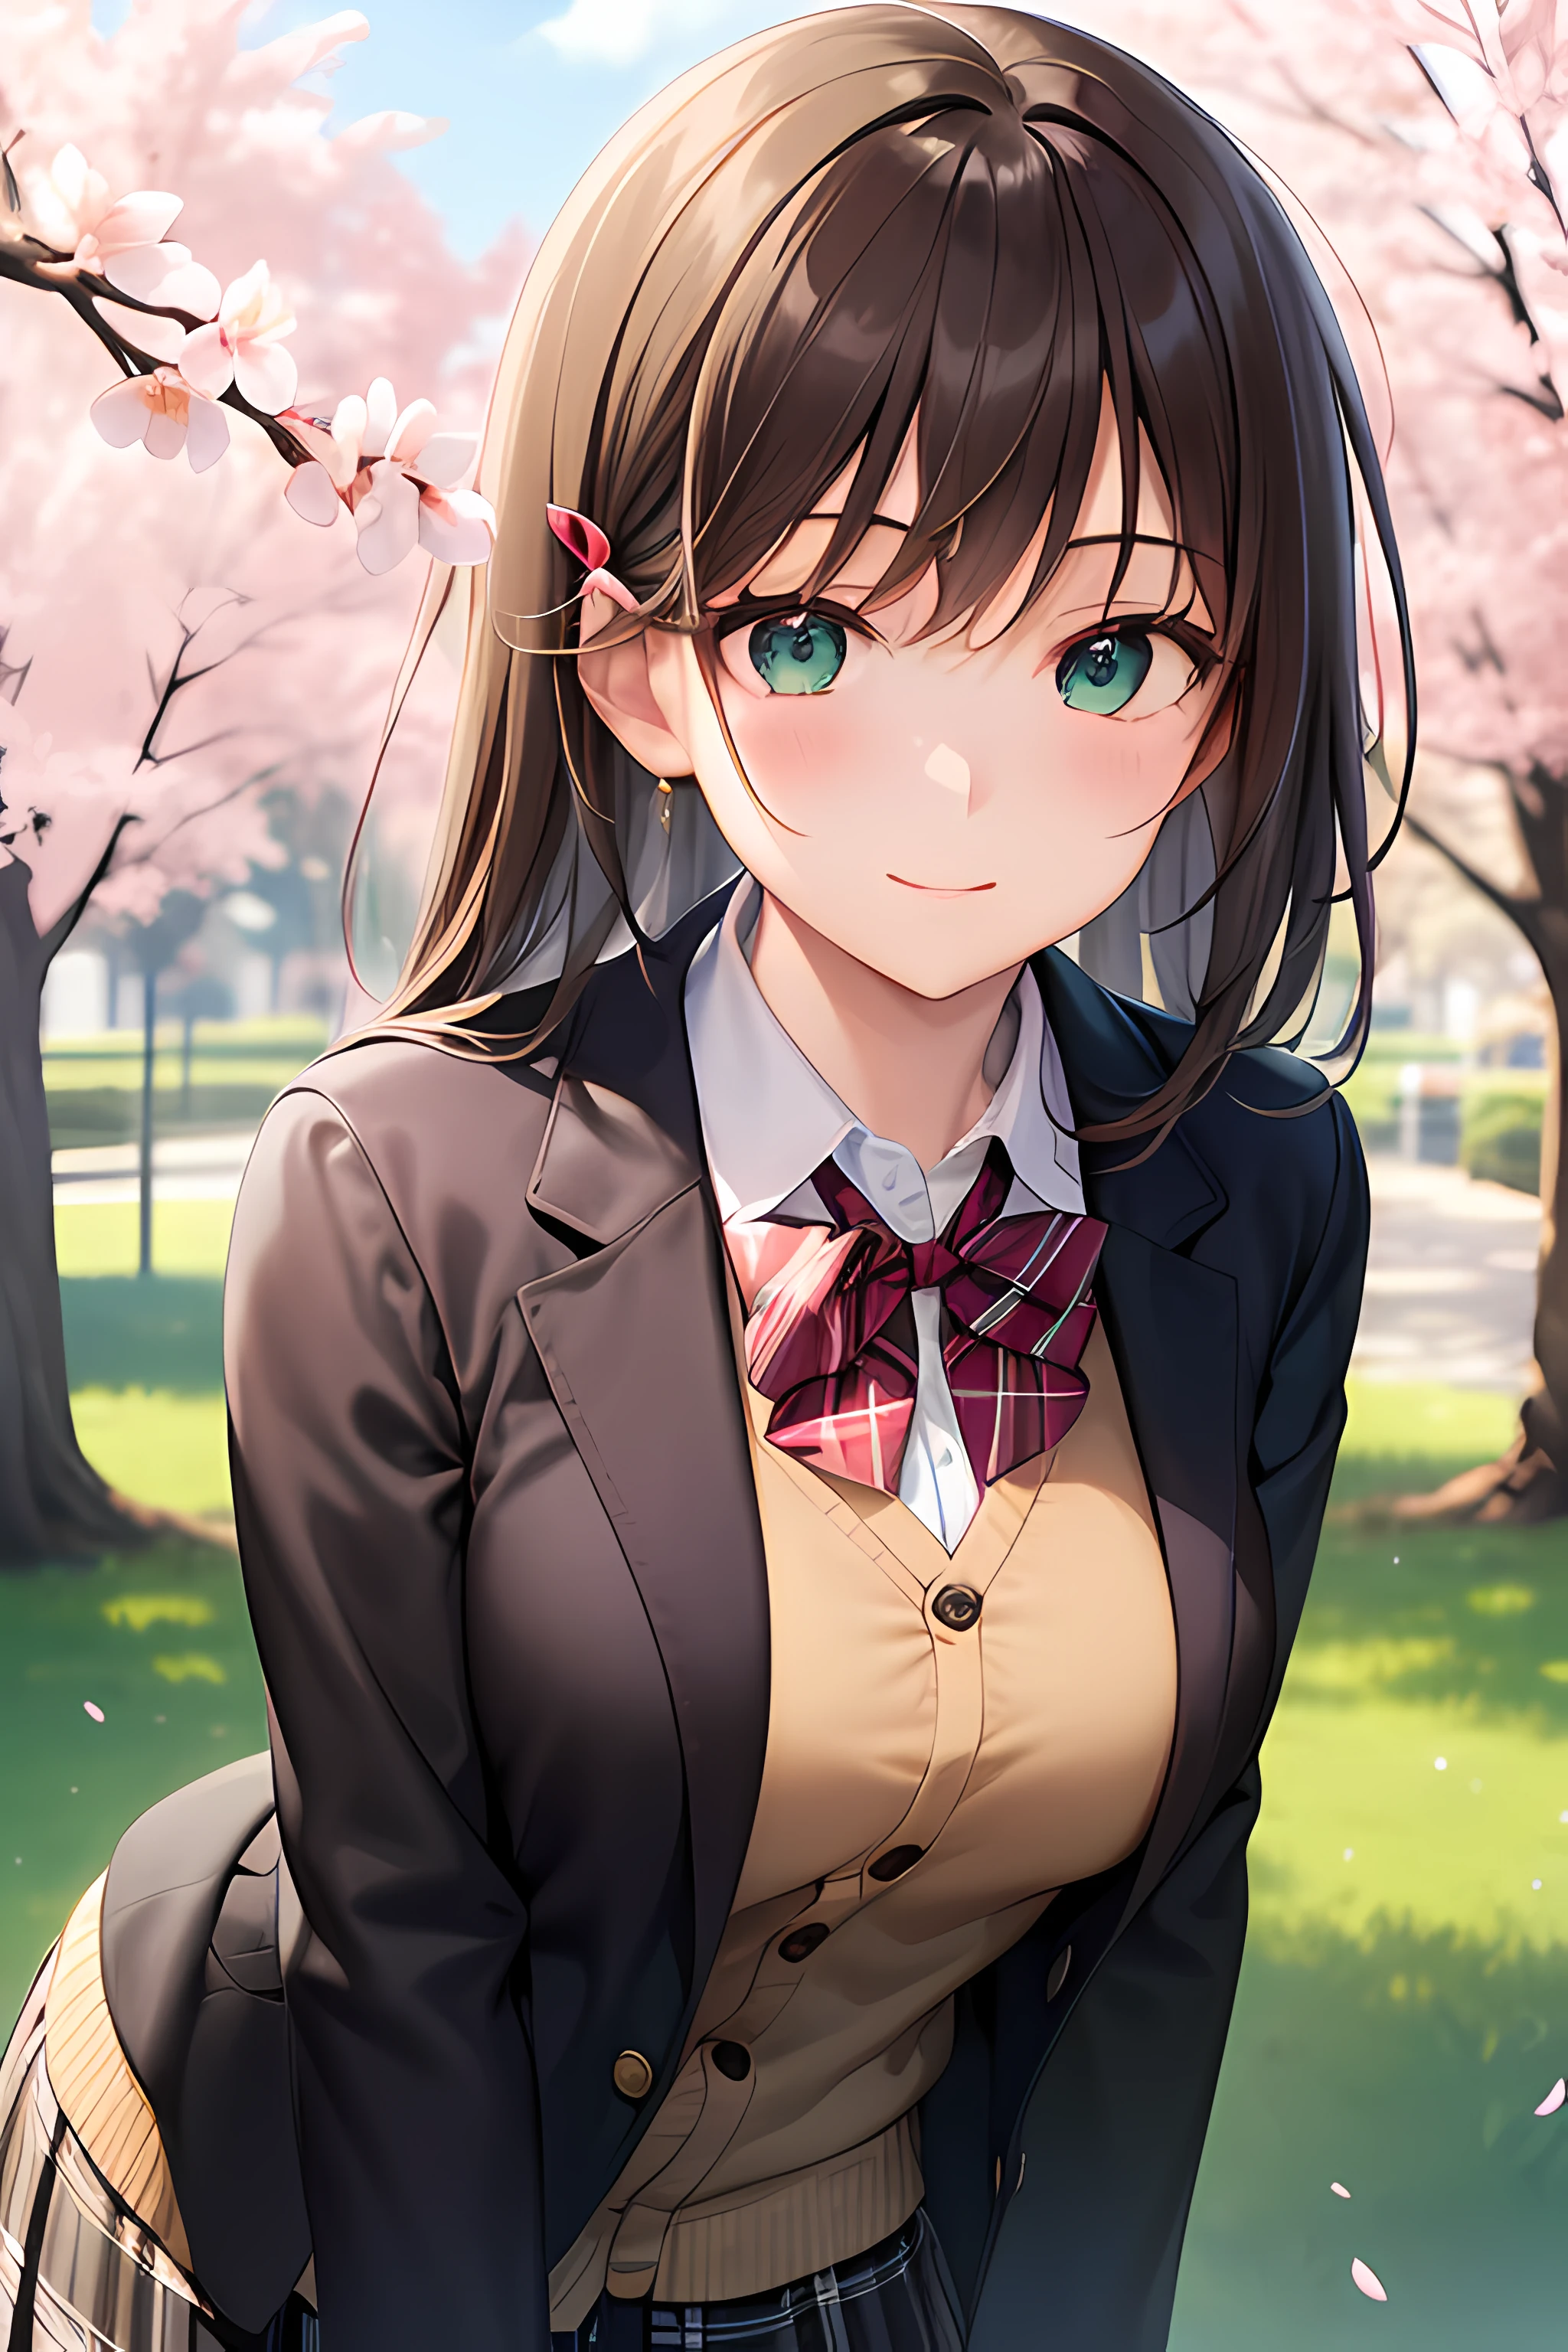 ((masterpiece, best quality, highres, UHD, perfect pixel, depth of field, 4k, RTX, HDR))), 1girl, single, solo, beautiful anime girl, beautiful artstyle, anime character, ((long hair, bangs, dark brown hair, simple hair pin)), ((green eyes:1.4, rounded eyes, beautiful eyelashes, realistic eyes)), ((detailed face, blushing:1.2)), ((smooth texture:0.75, realistic texture:0.65, photorealistic:1.1, anime CG style)), medium breasts, ((dynamic angle, close up, pov)), perfect body, ((red bowtie, , black jacket, open jacket, brown cardigan, white shirt, black skirt, plaid skirt)), smile, hand behind back, leaning forward, amusement park, cherry blossoms